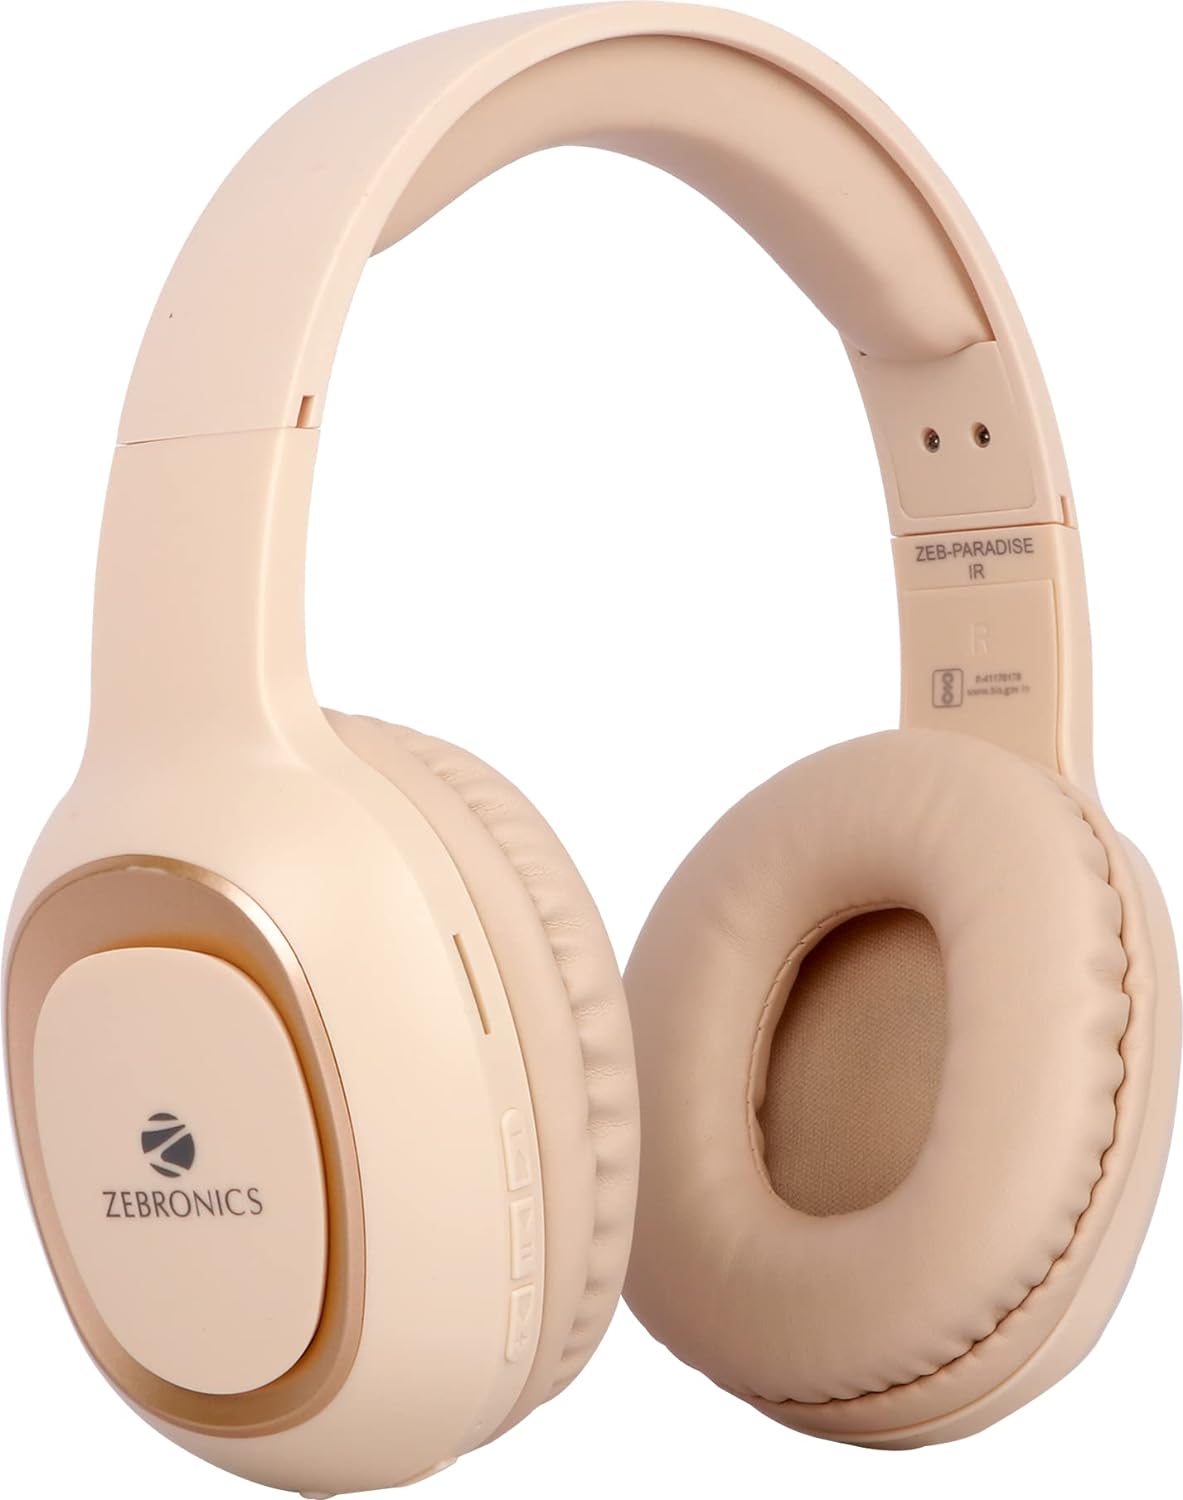 Zebronics Zeb - Paradise Bluetooth Wireless On Ear Headphones With Mic Comes With 40Mm Drivers, Aux Connectivity, Built In Fm, Call Function, 15Hrs* Playback Time And Supports Micro Sd Card (Beige)